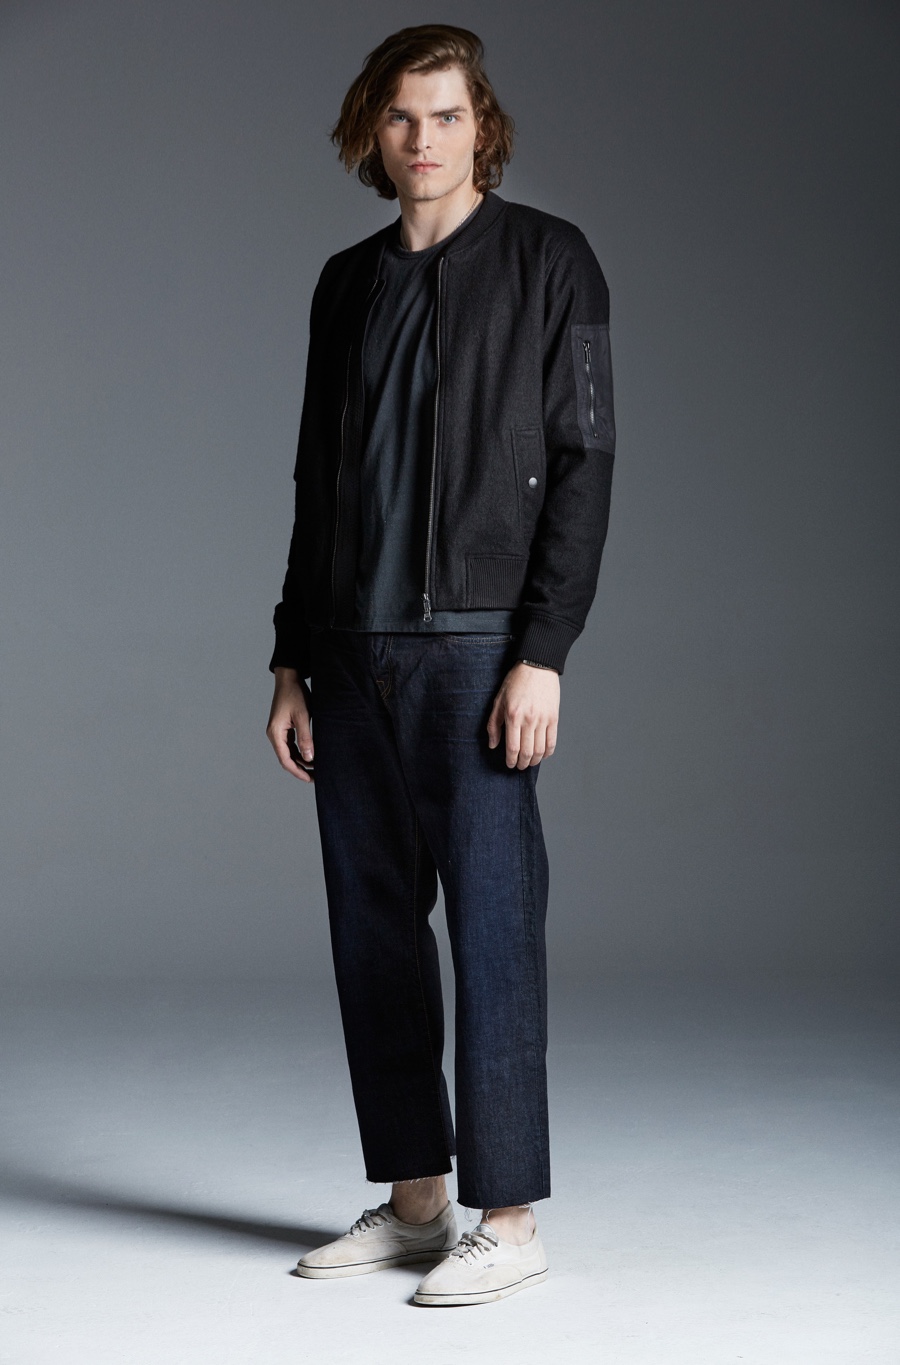 Baldwin Unveils Essentials for Holiday 2015 Menswear Collection